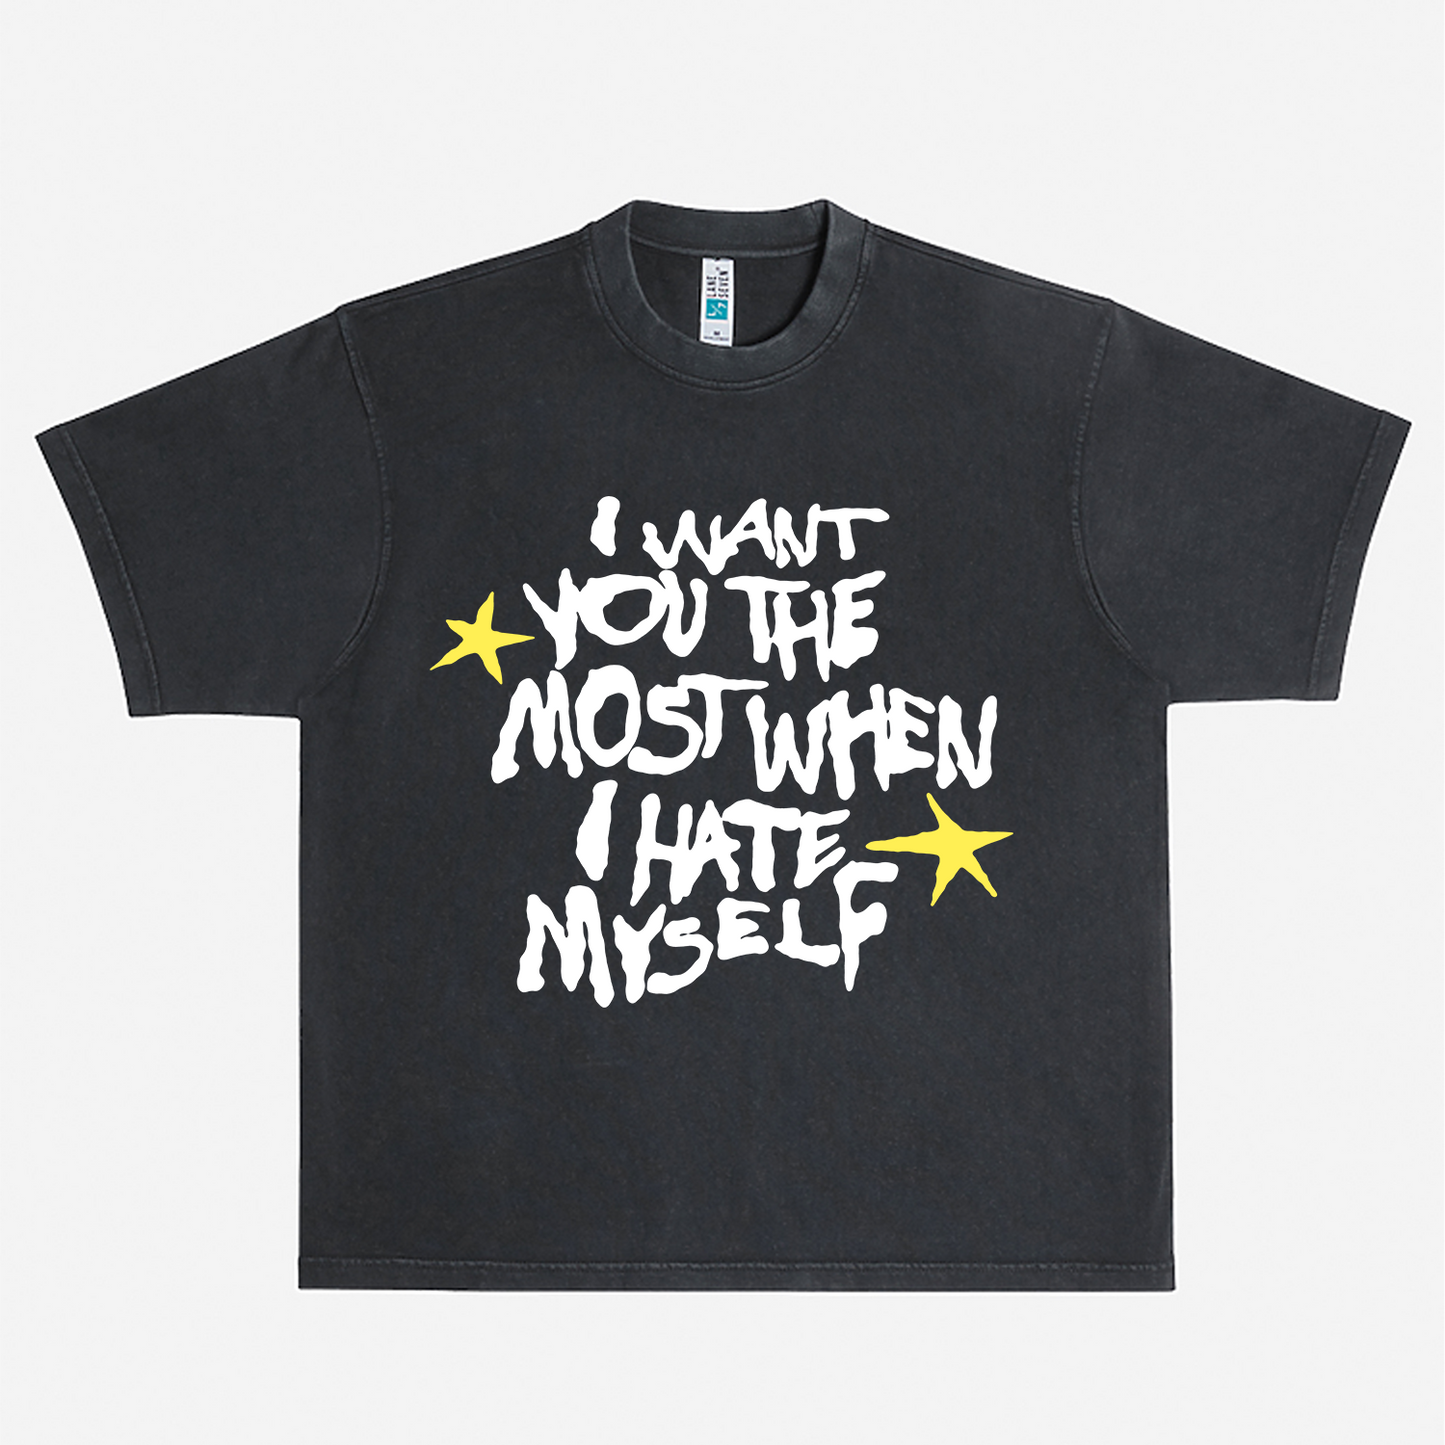 'I WANT YOU THE MOST WHEN I HATE MYSELF' TEE